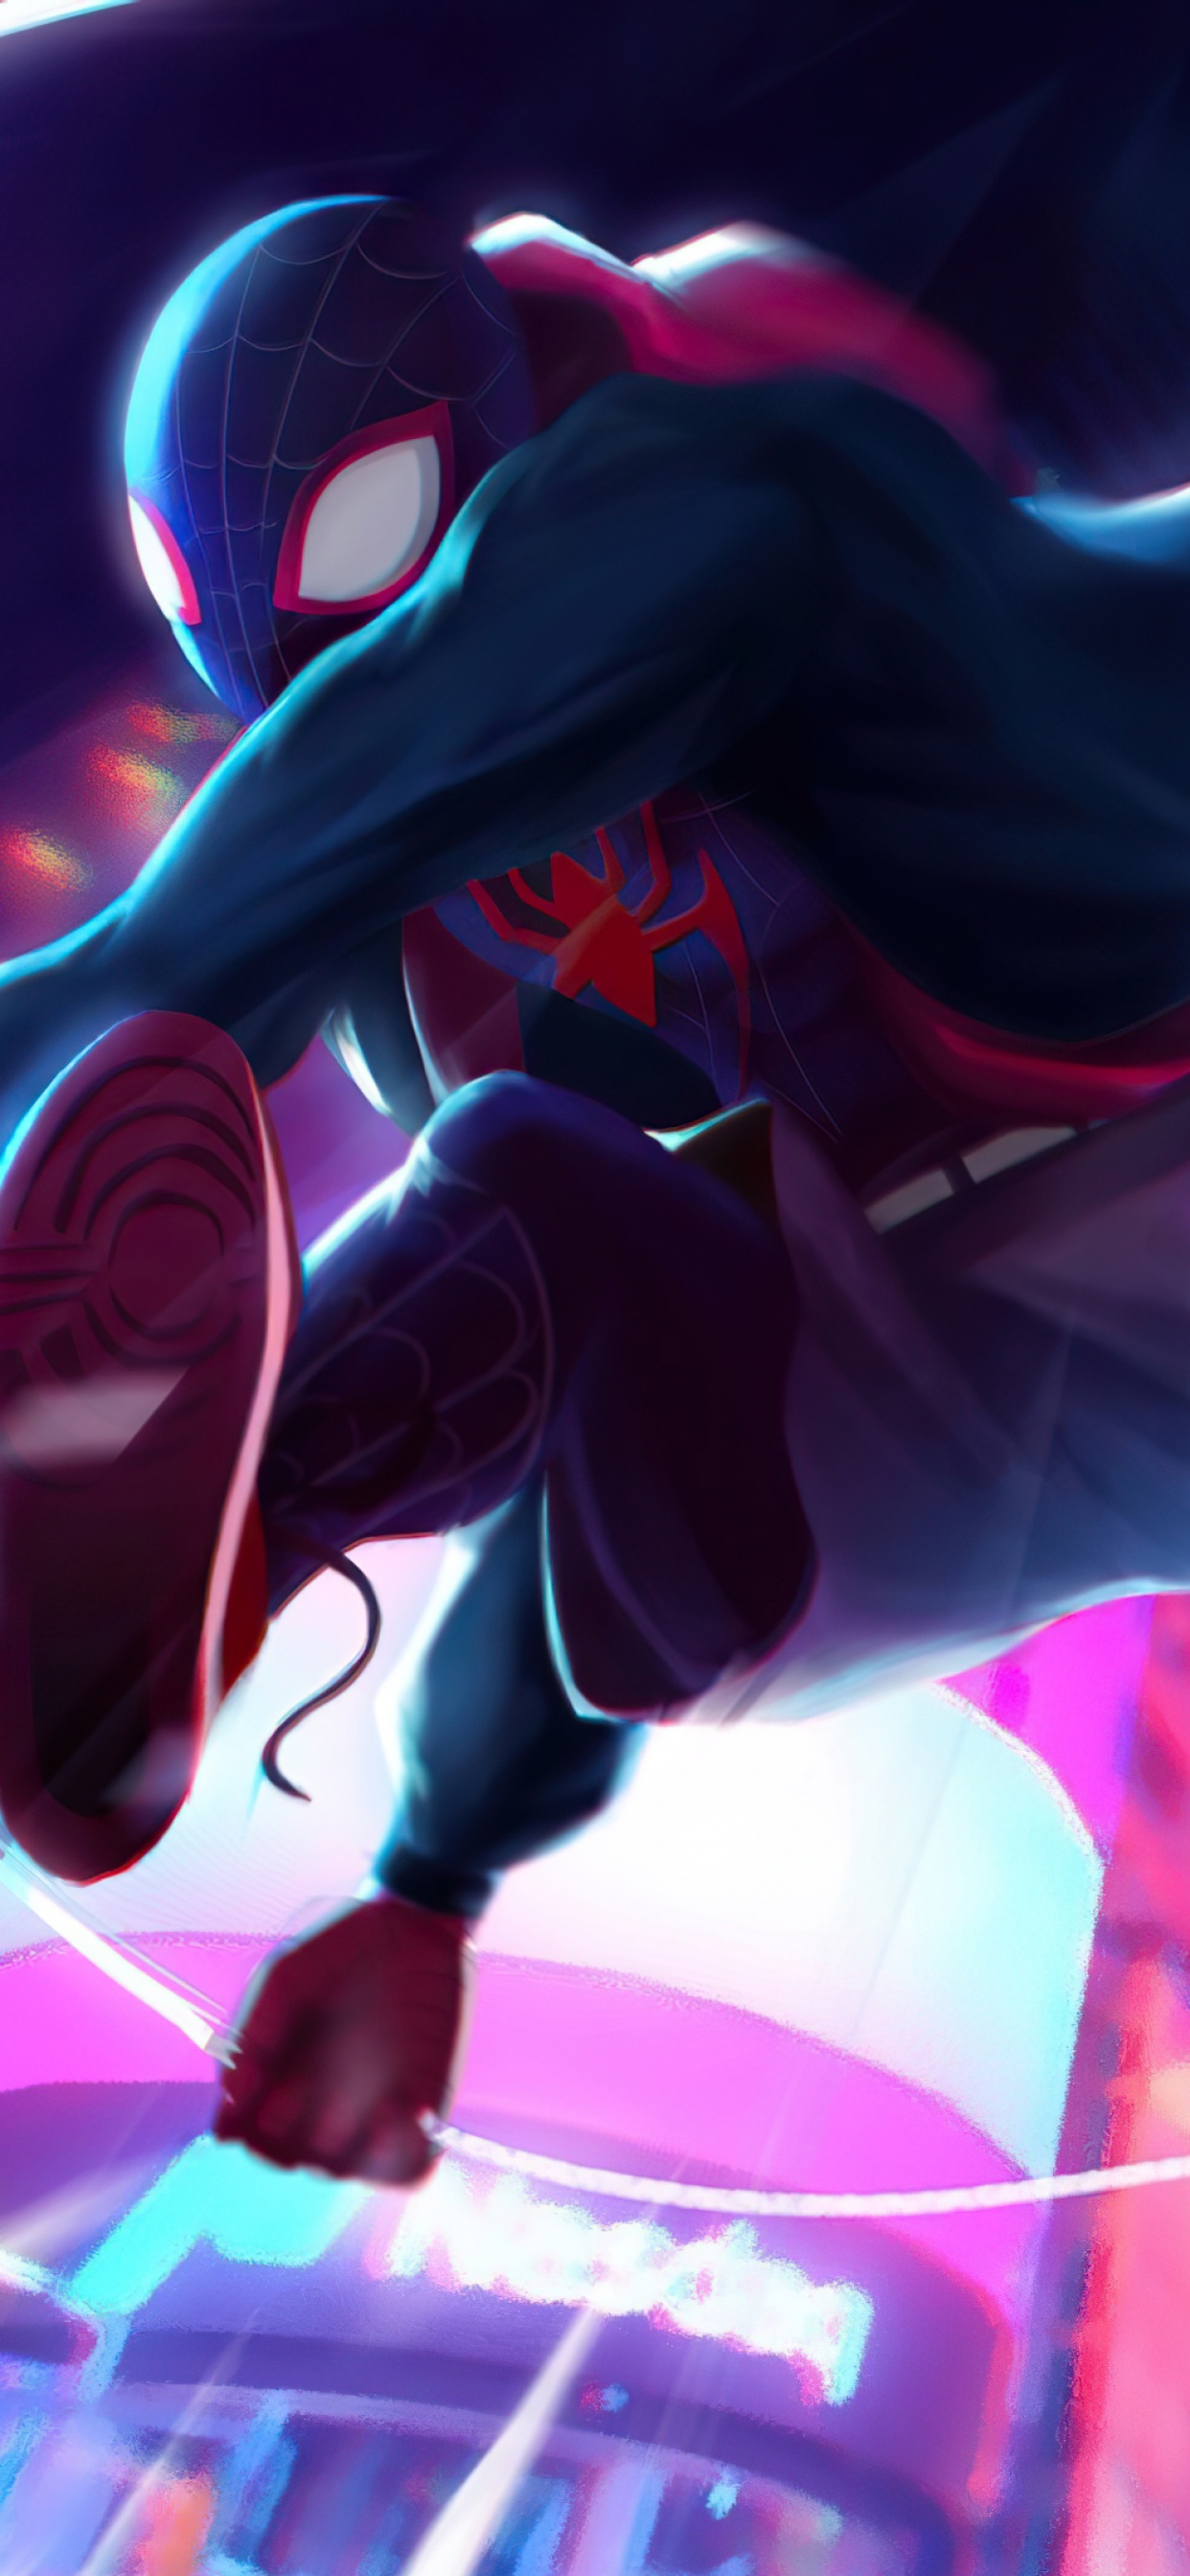 Miles Morales 4K Wallpaper, Spider-Man: Into the Spider